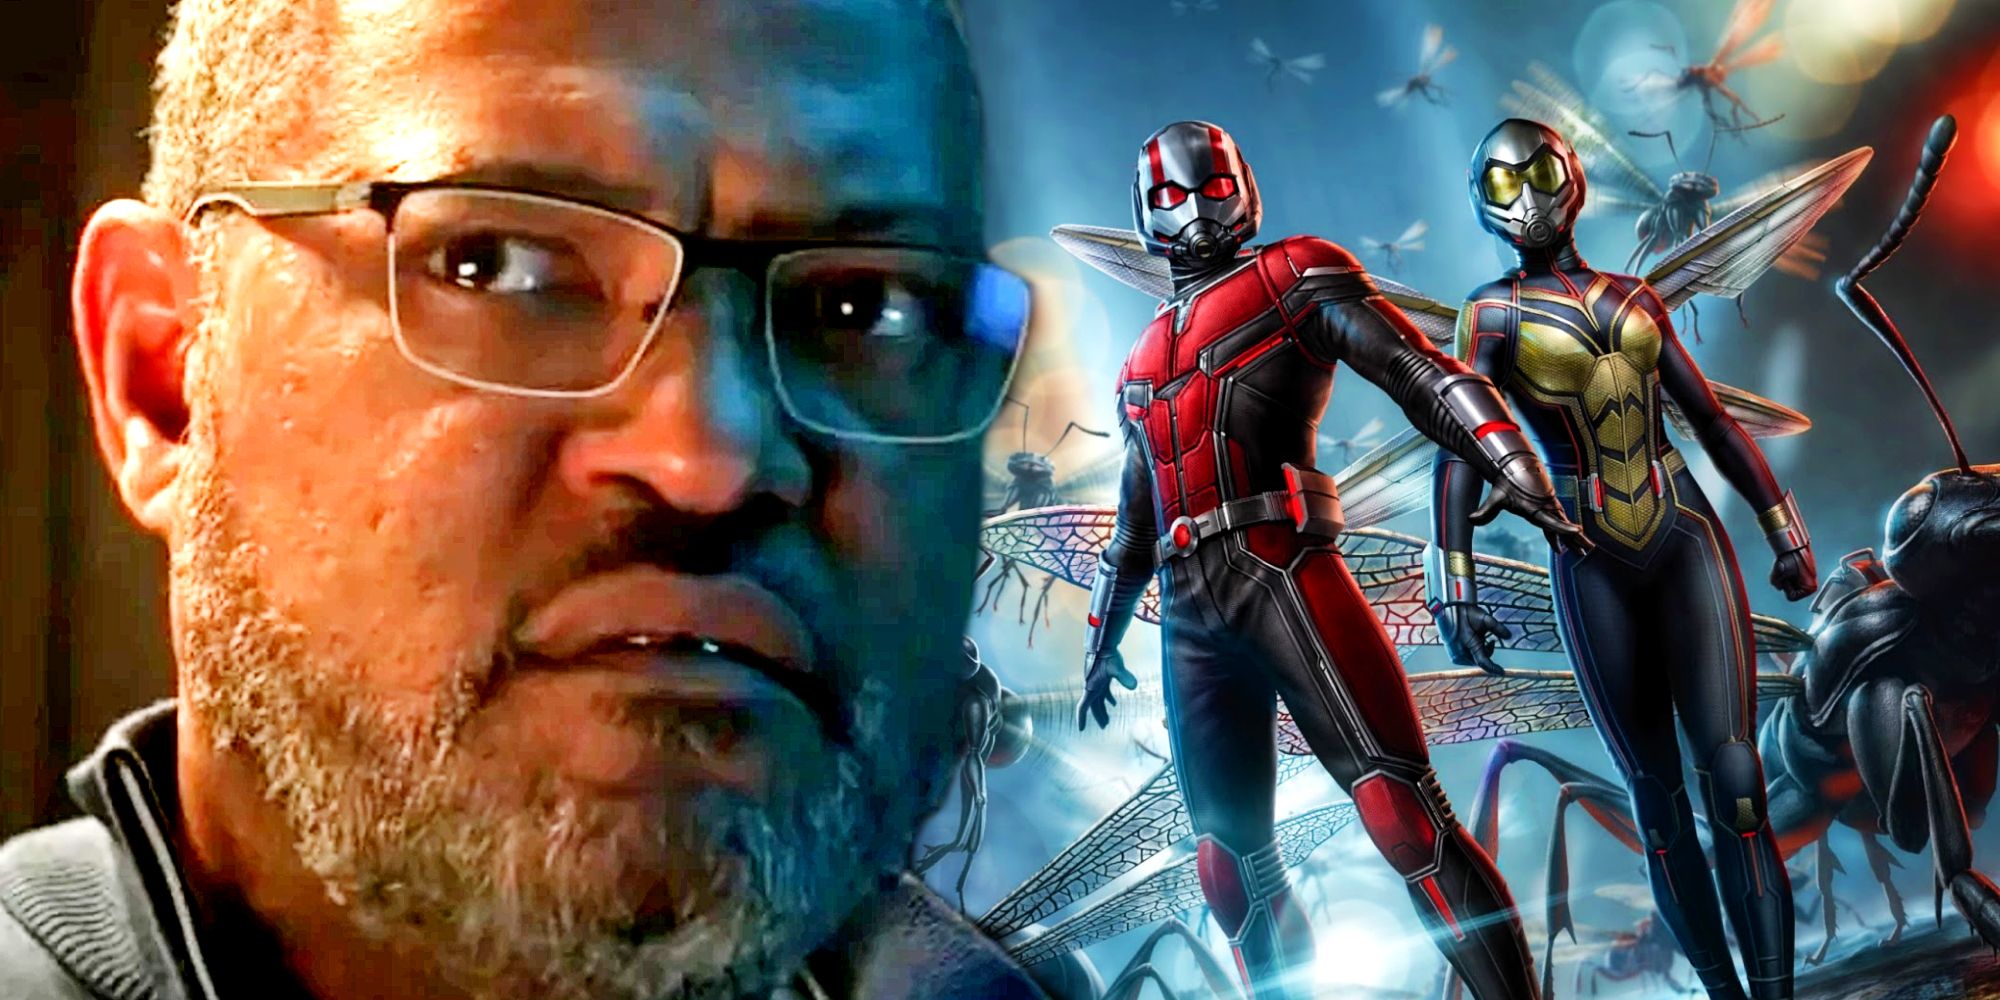 Laurence Fishburne as Bill Foster in the MCU Ant-Man and the Wasp